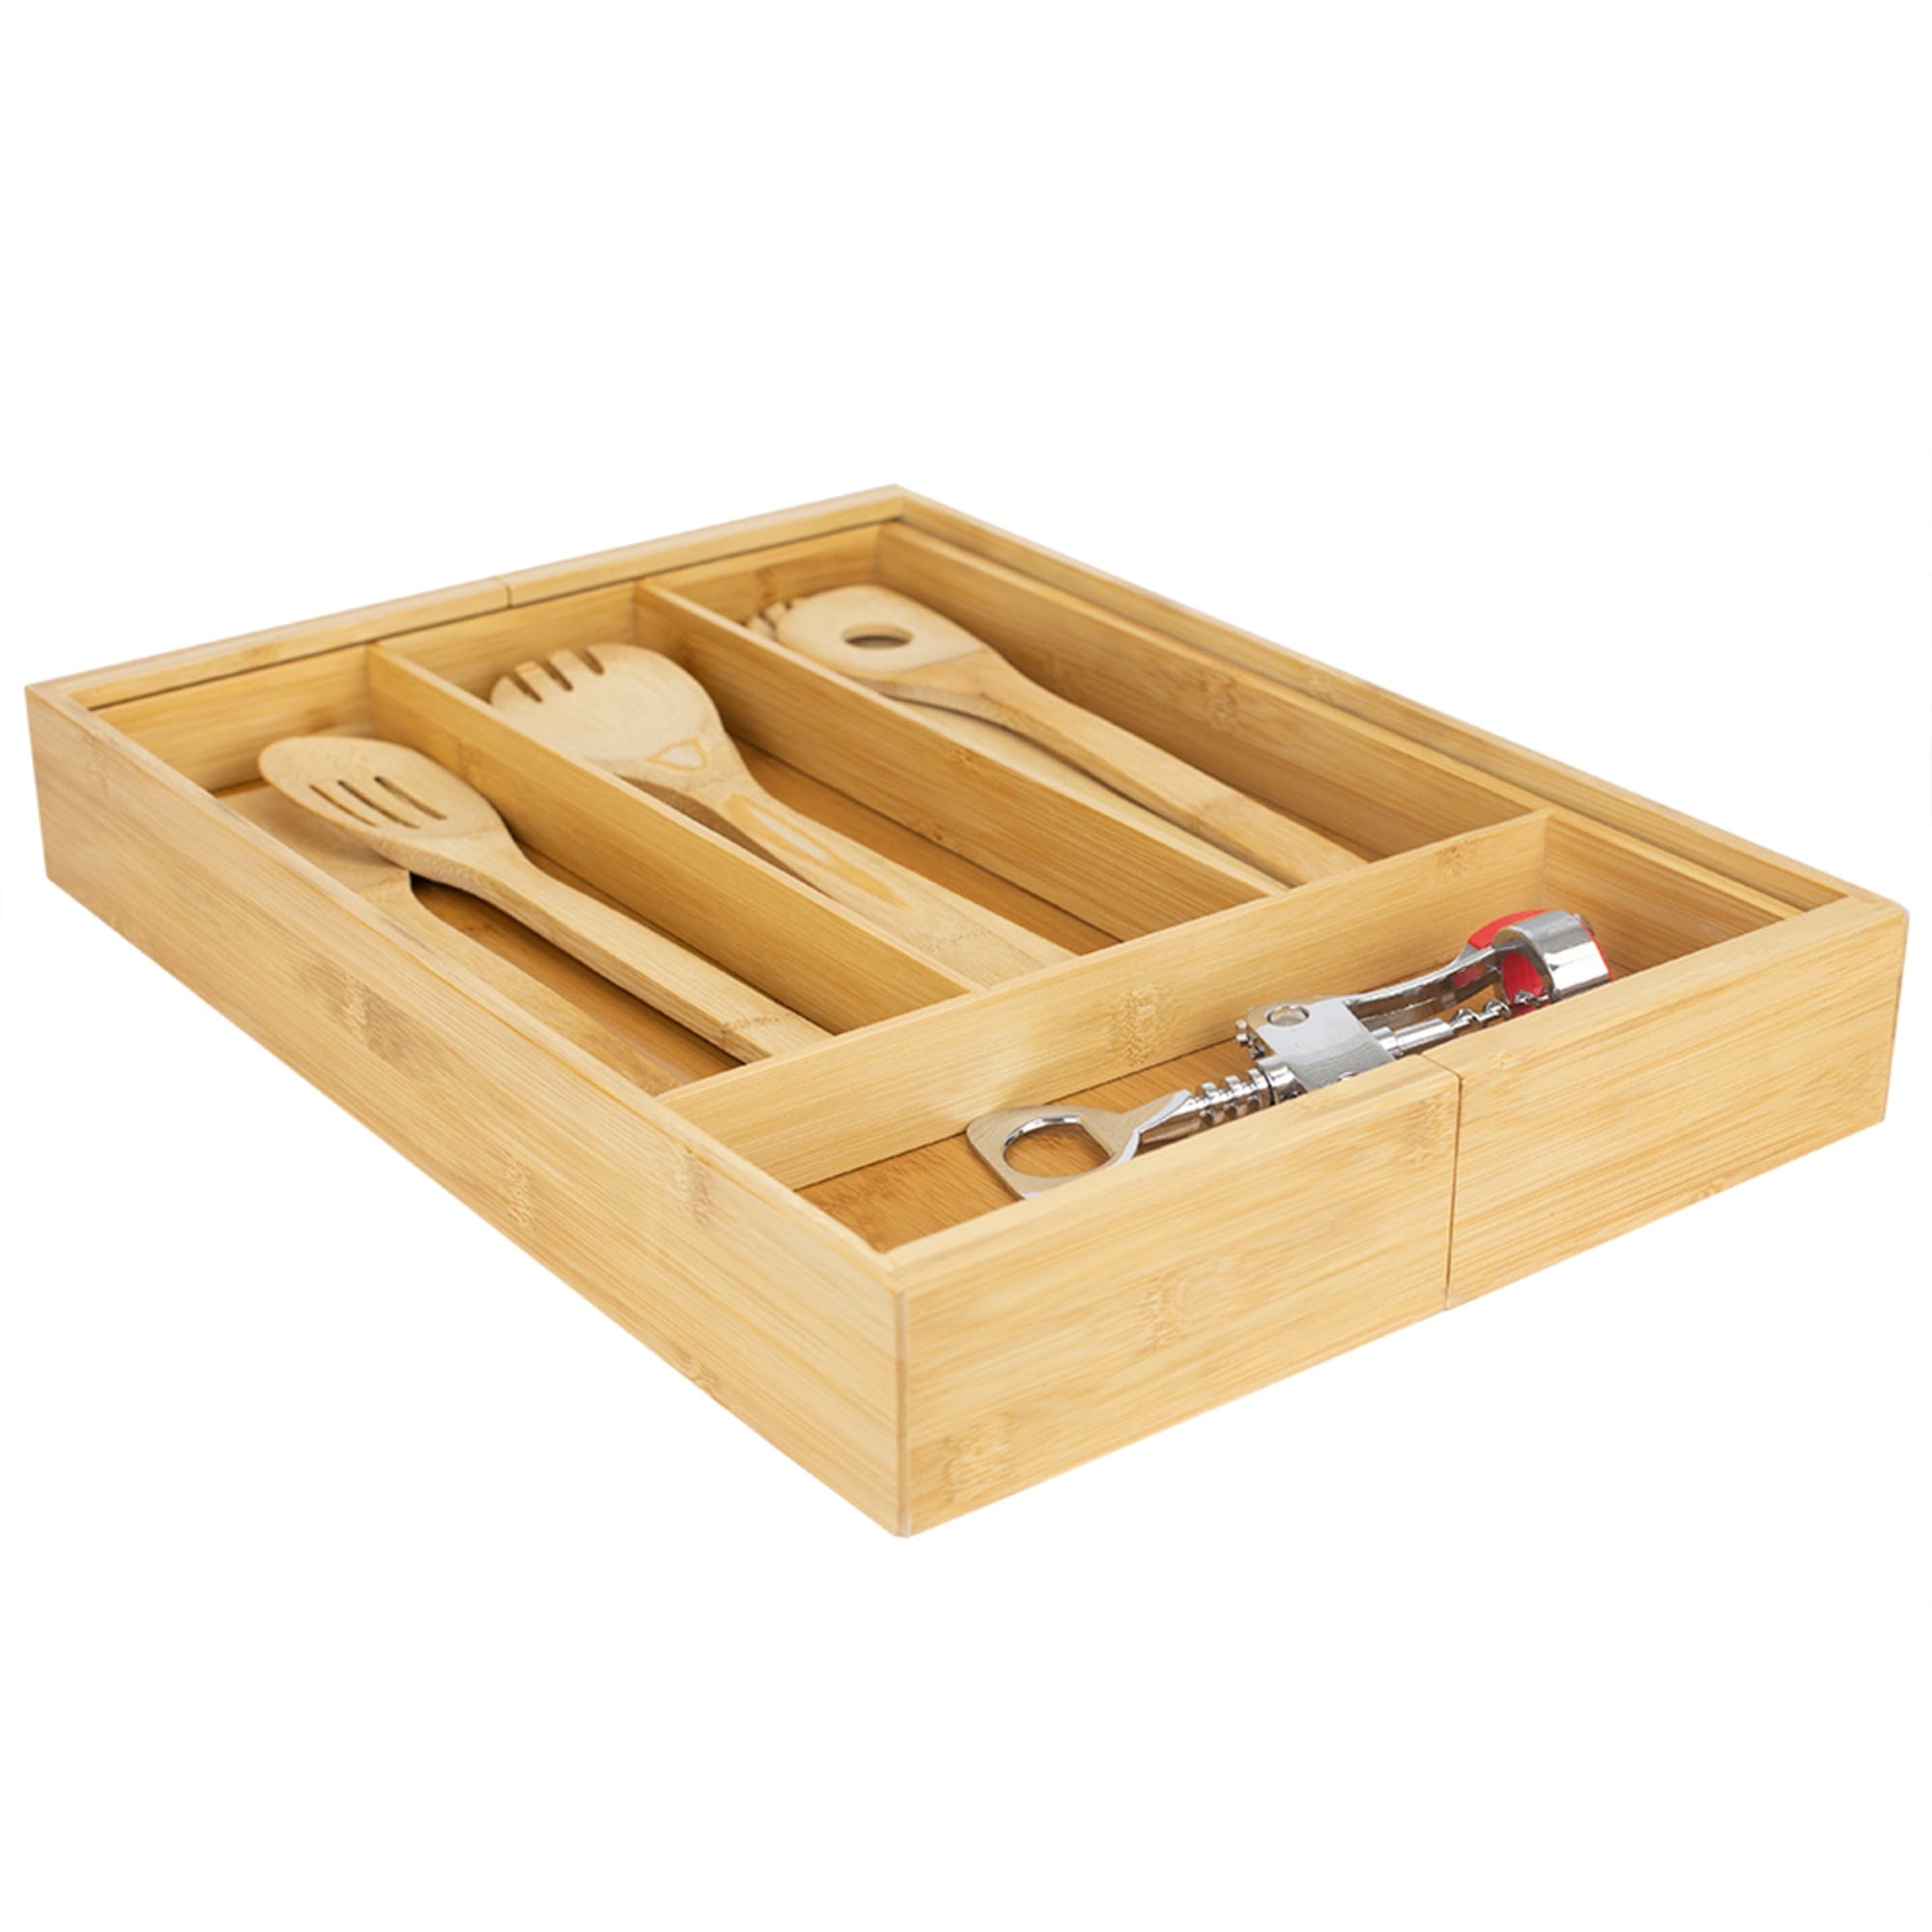 Home Basics Expandable Bamboo Utensil Tray, Natural $20.00 EACH, CASE PACK OF 6